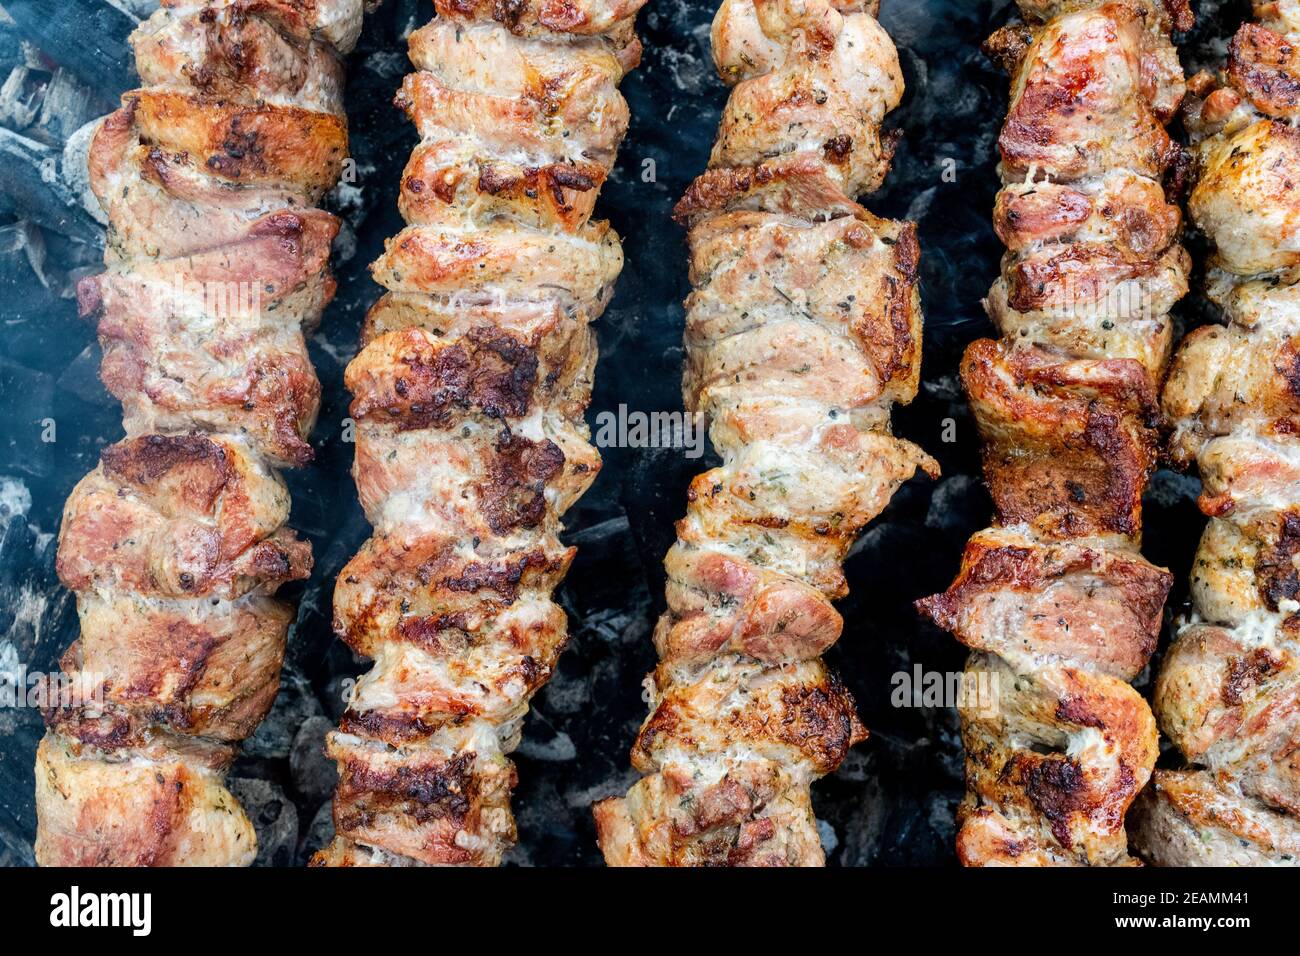 Frying pork on a skewer over a brazier. Turning meat over coals. Appetizing shish kebab. Stock Photo